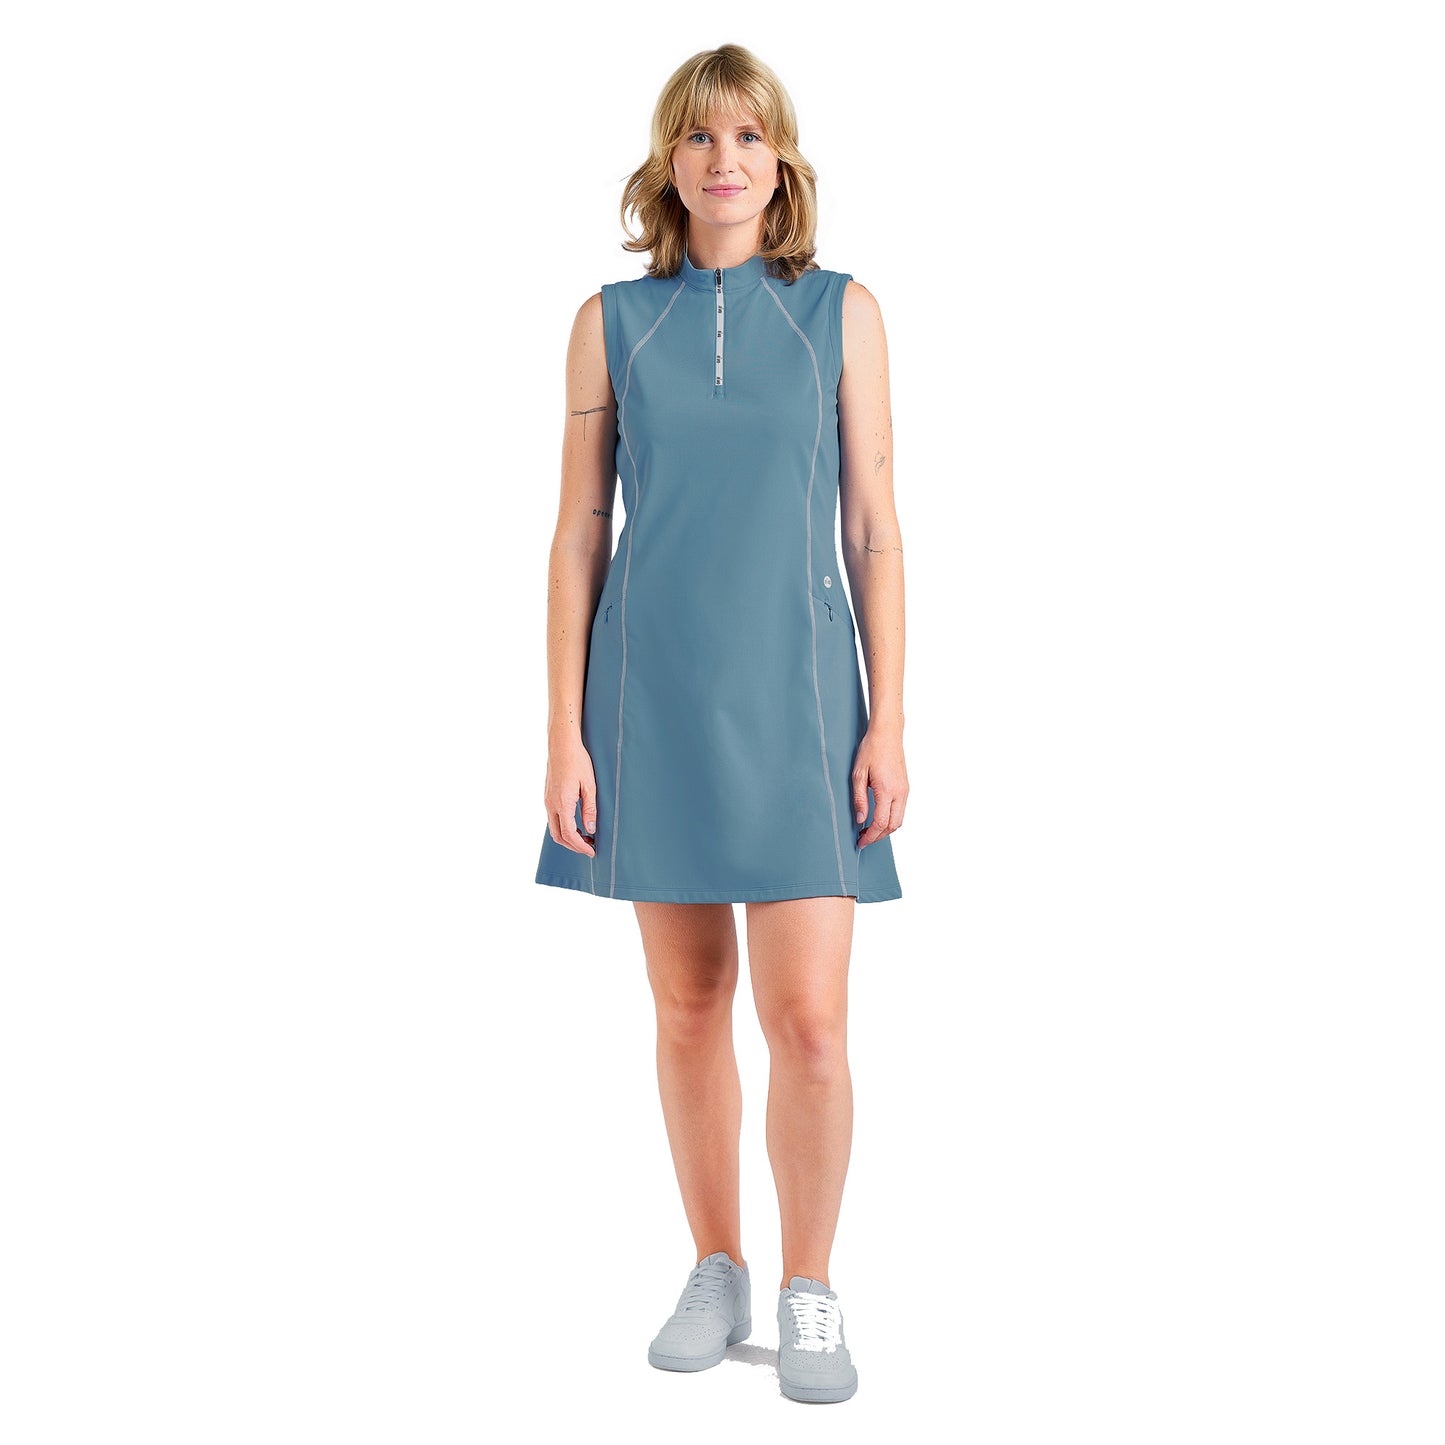 Nivo Ladies Sleeveless Active Dress with UPF50+ in Sea Reflection